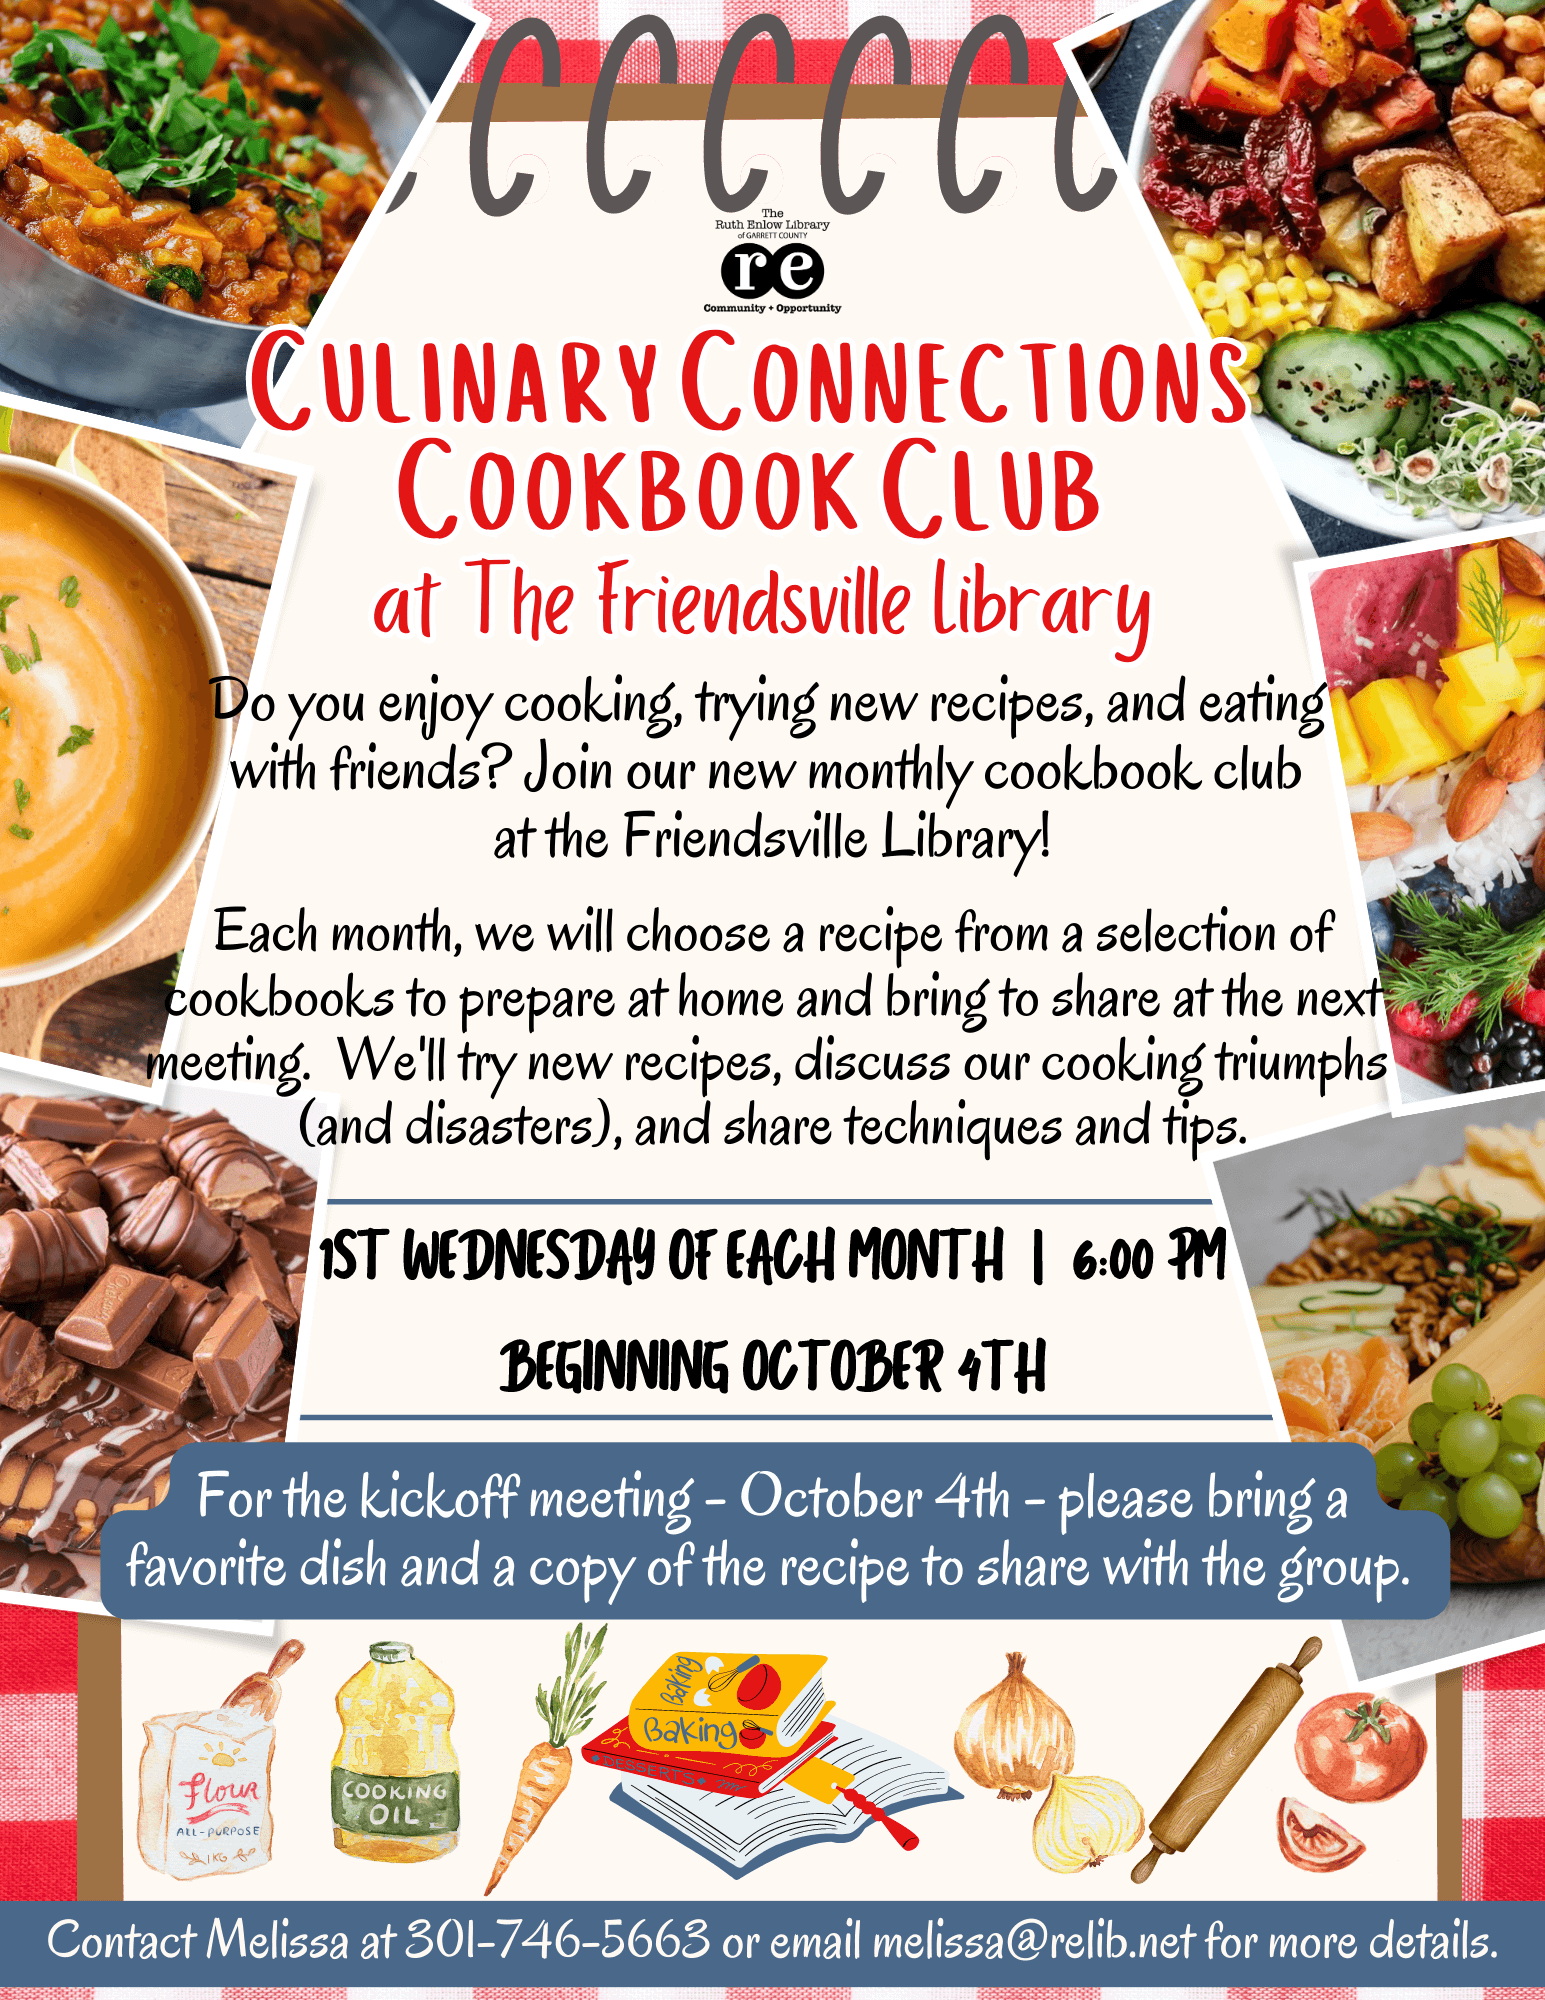 Culinary Connections Cookbook Club at Deep Creek Lake, MD